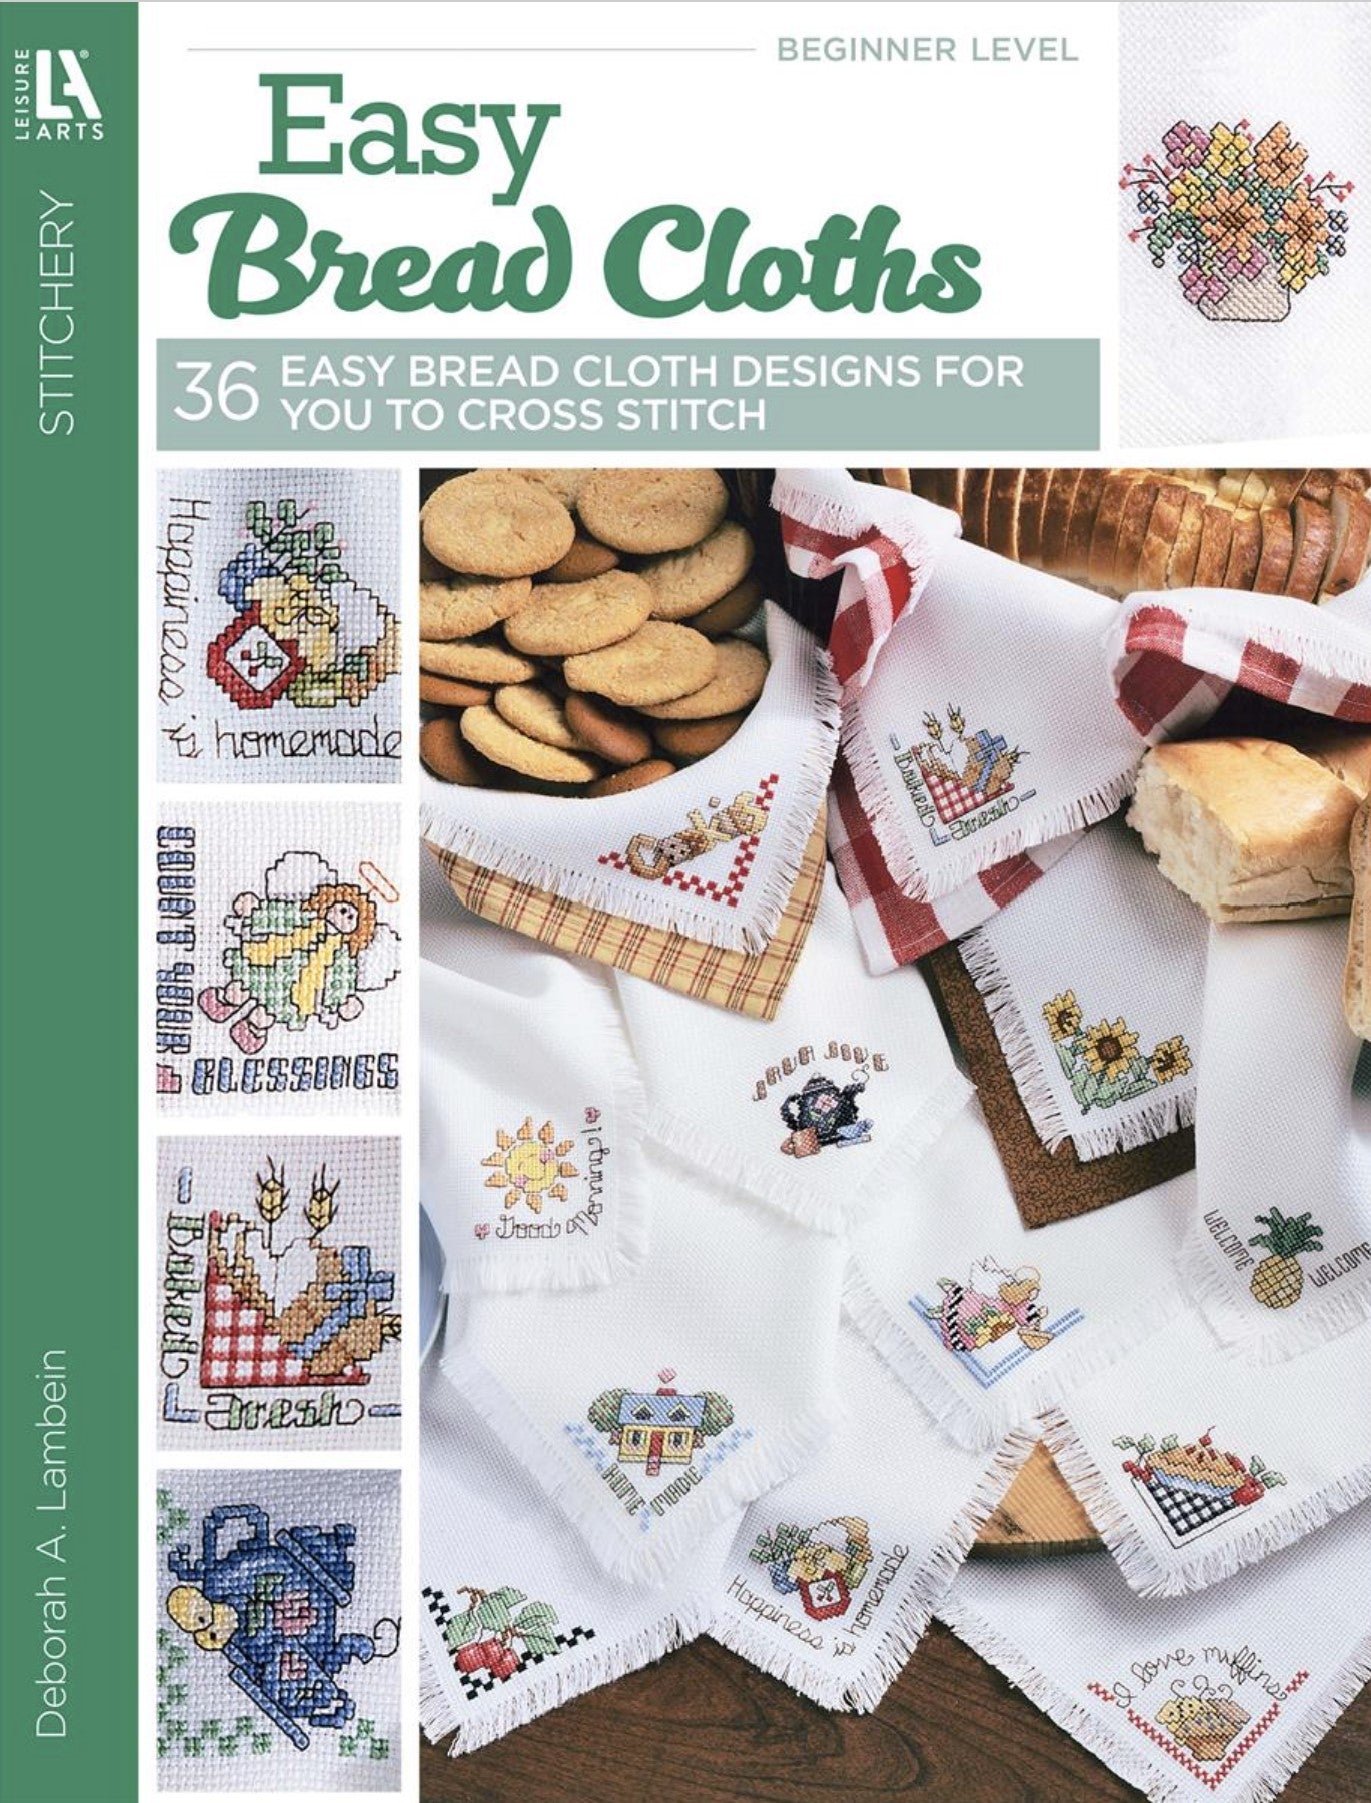 36 Easy Bread Cloths To Cross-Stitch Book by Deborah A. Lambein - Leis –  Blanks for Crafters